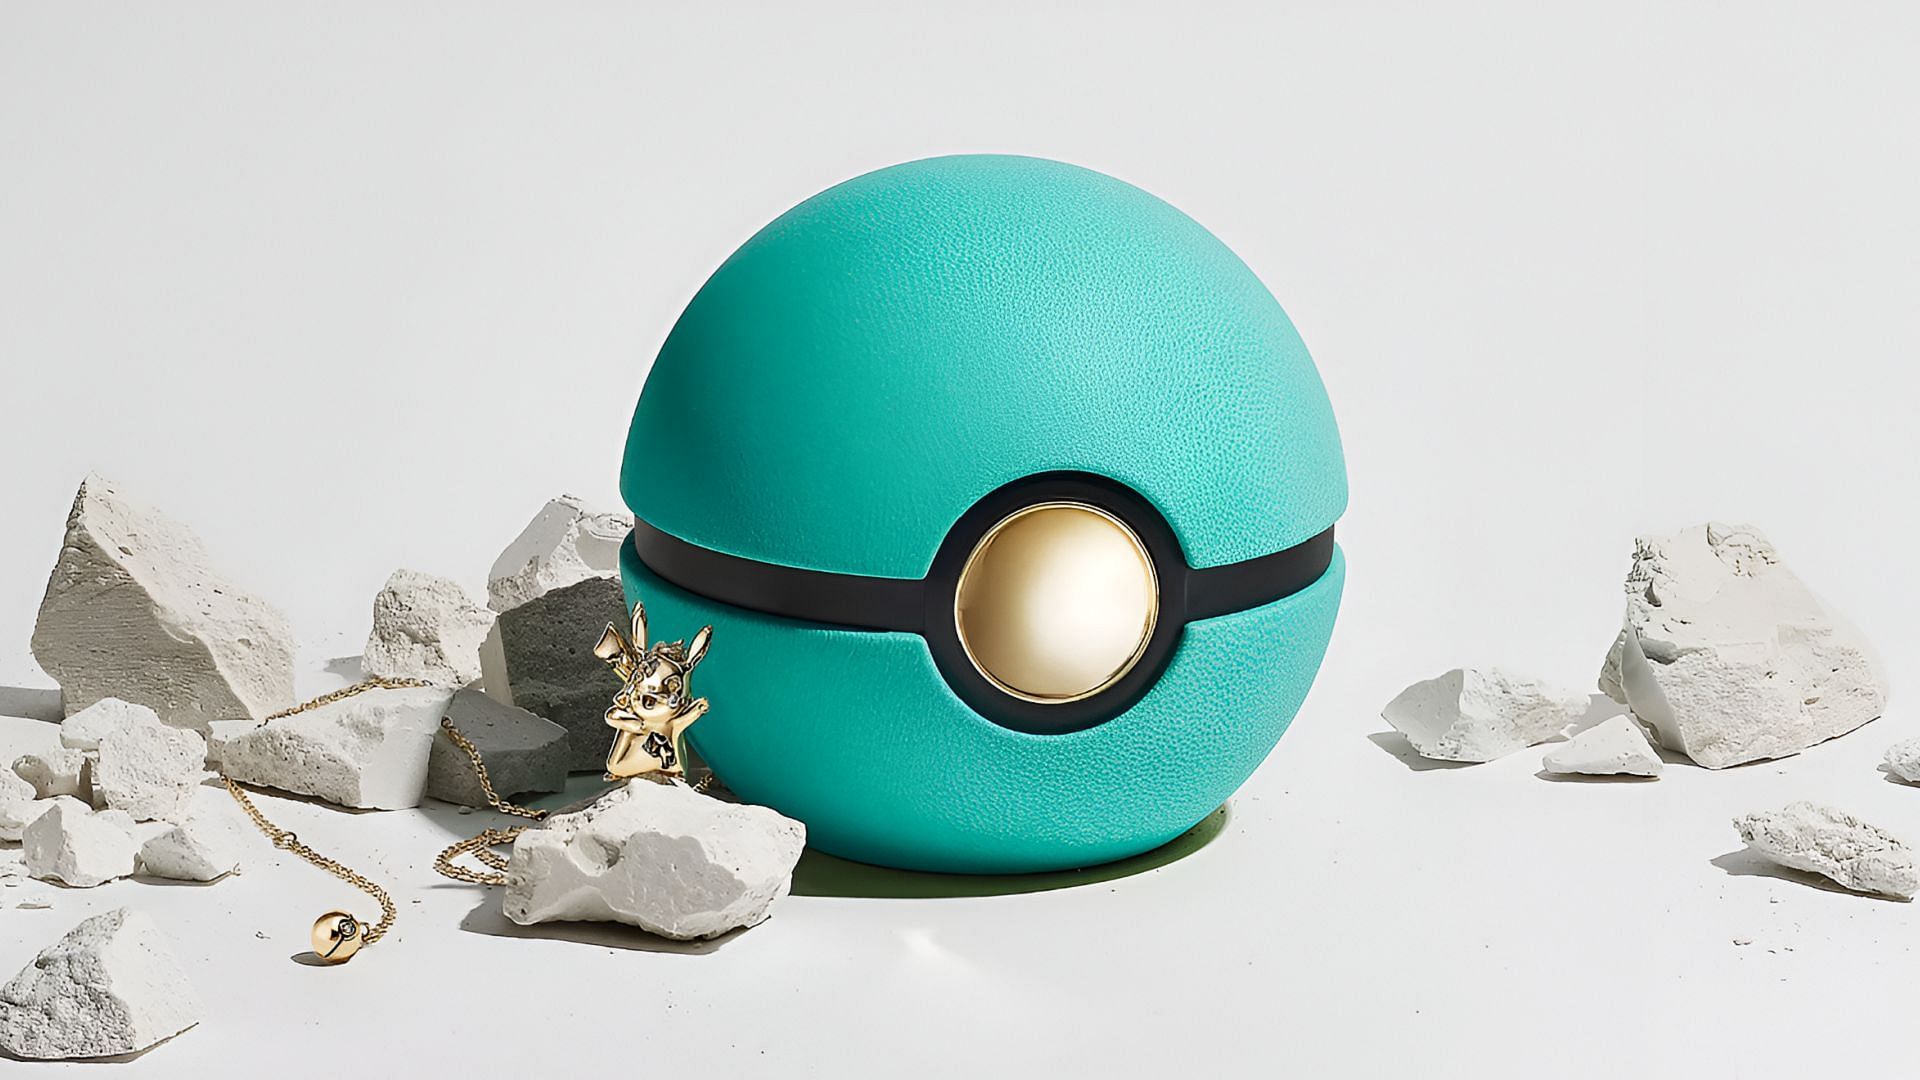 A teal and gold Poke Ball featuring Pokemon jewelry resembling Pikachu.